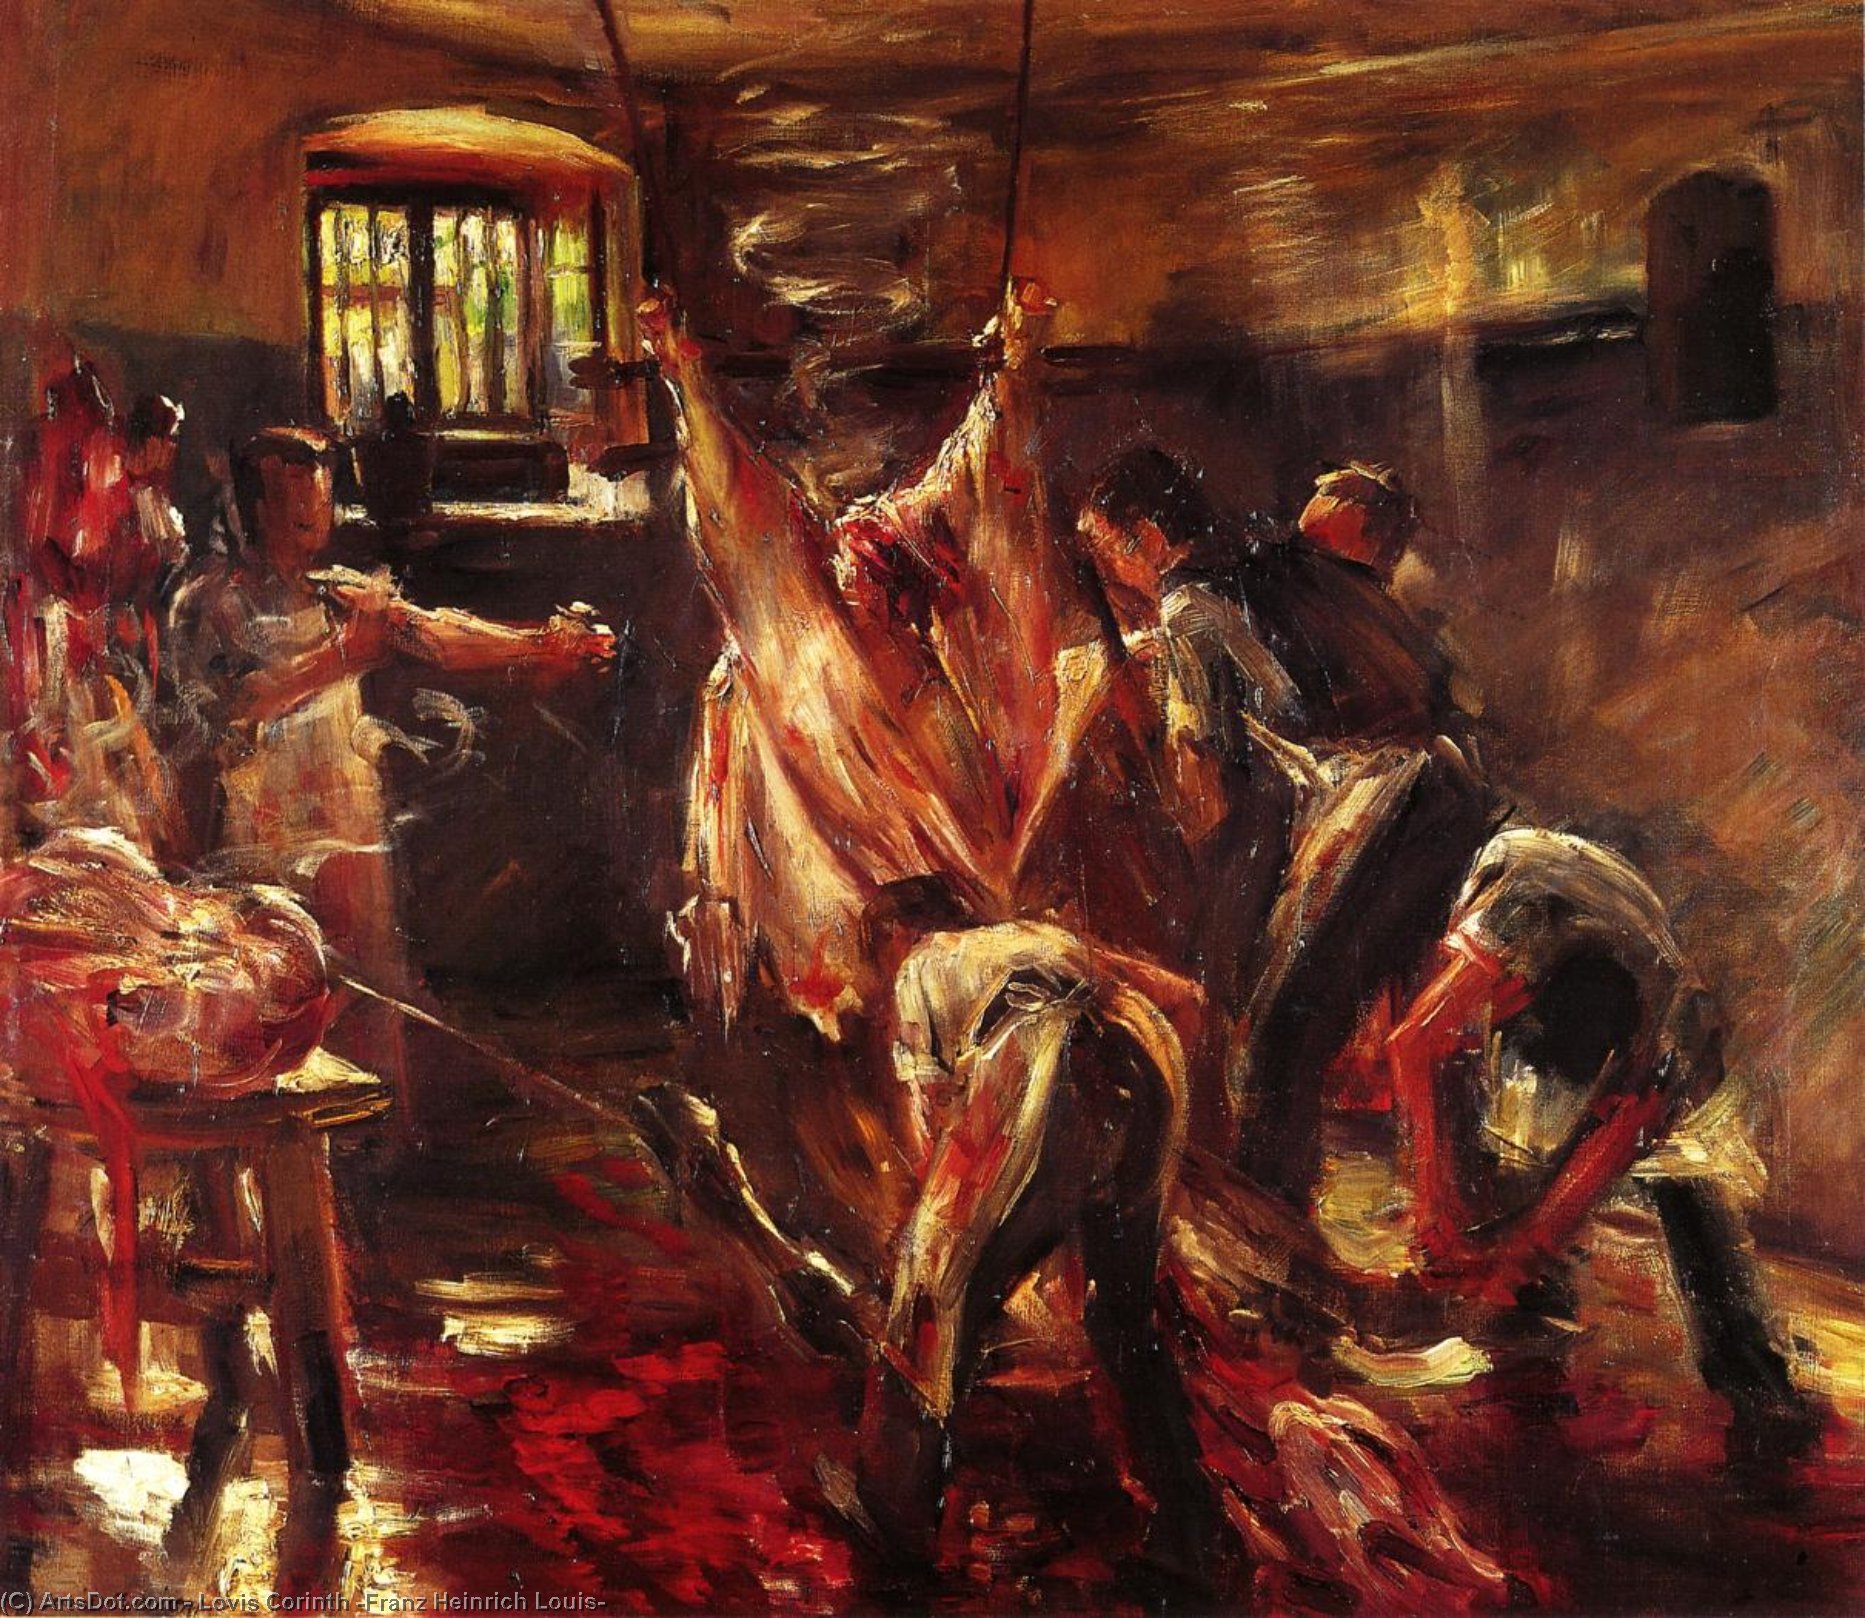 Order Paintings Reproductions In the Slaughter House, 1893 by Lovis Corinth (Franz Heinrich Louis) (1858-1925, Netherlands) | ArtsDot.com